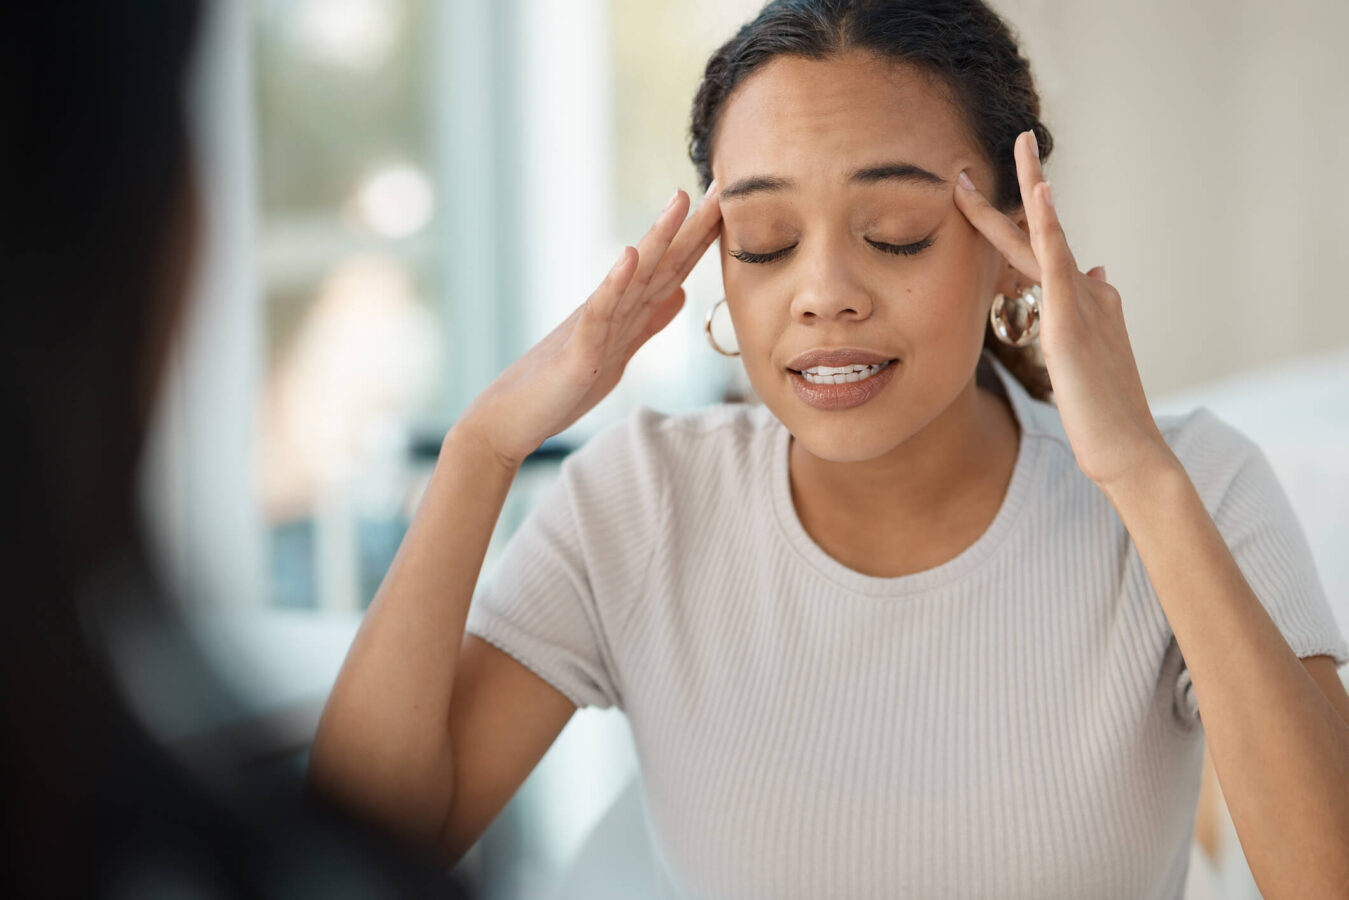 How Physical Therapy Can Help With Tension Headaches